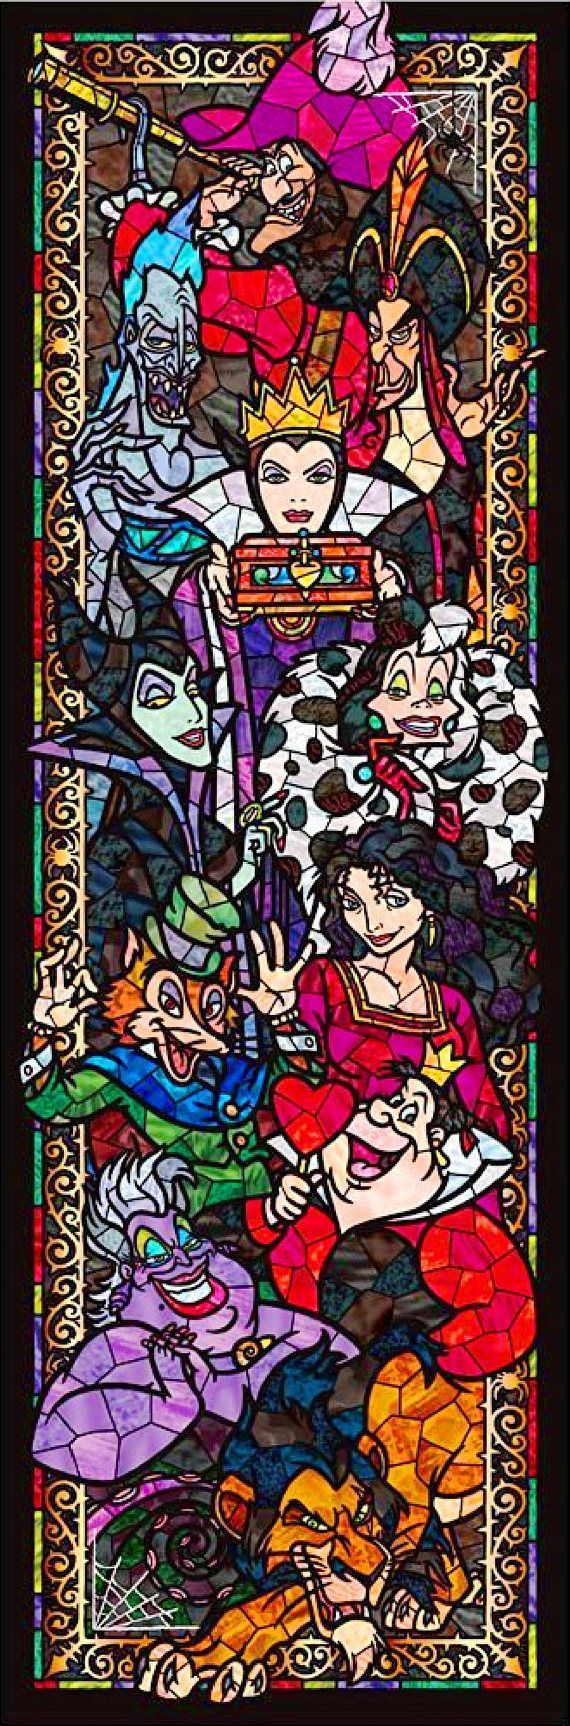 BUY GET 1 FREE! Disney Villains Stained Glass 033 Cross Stitch